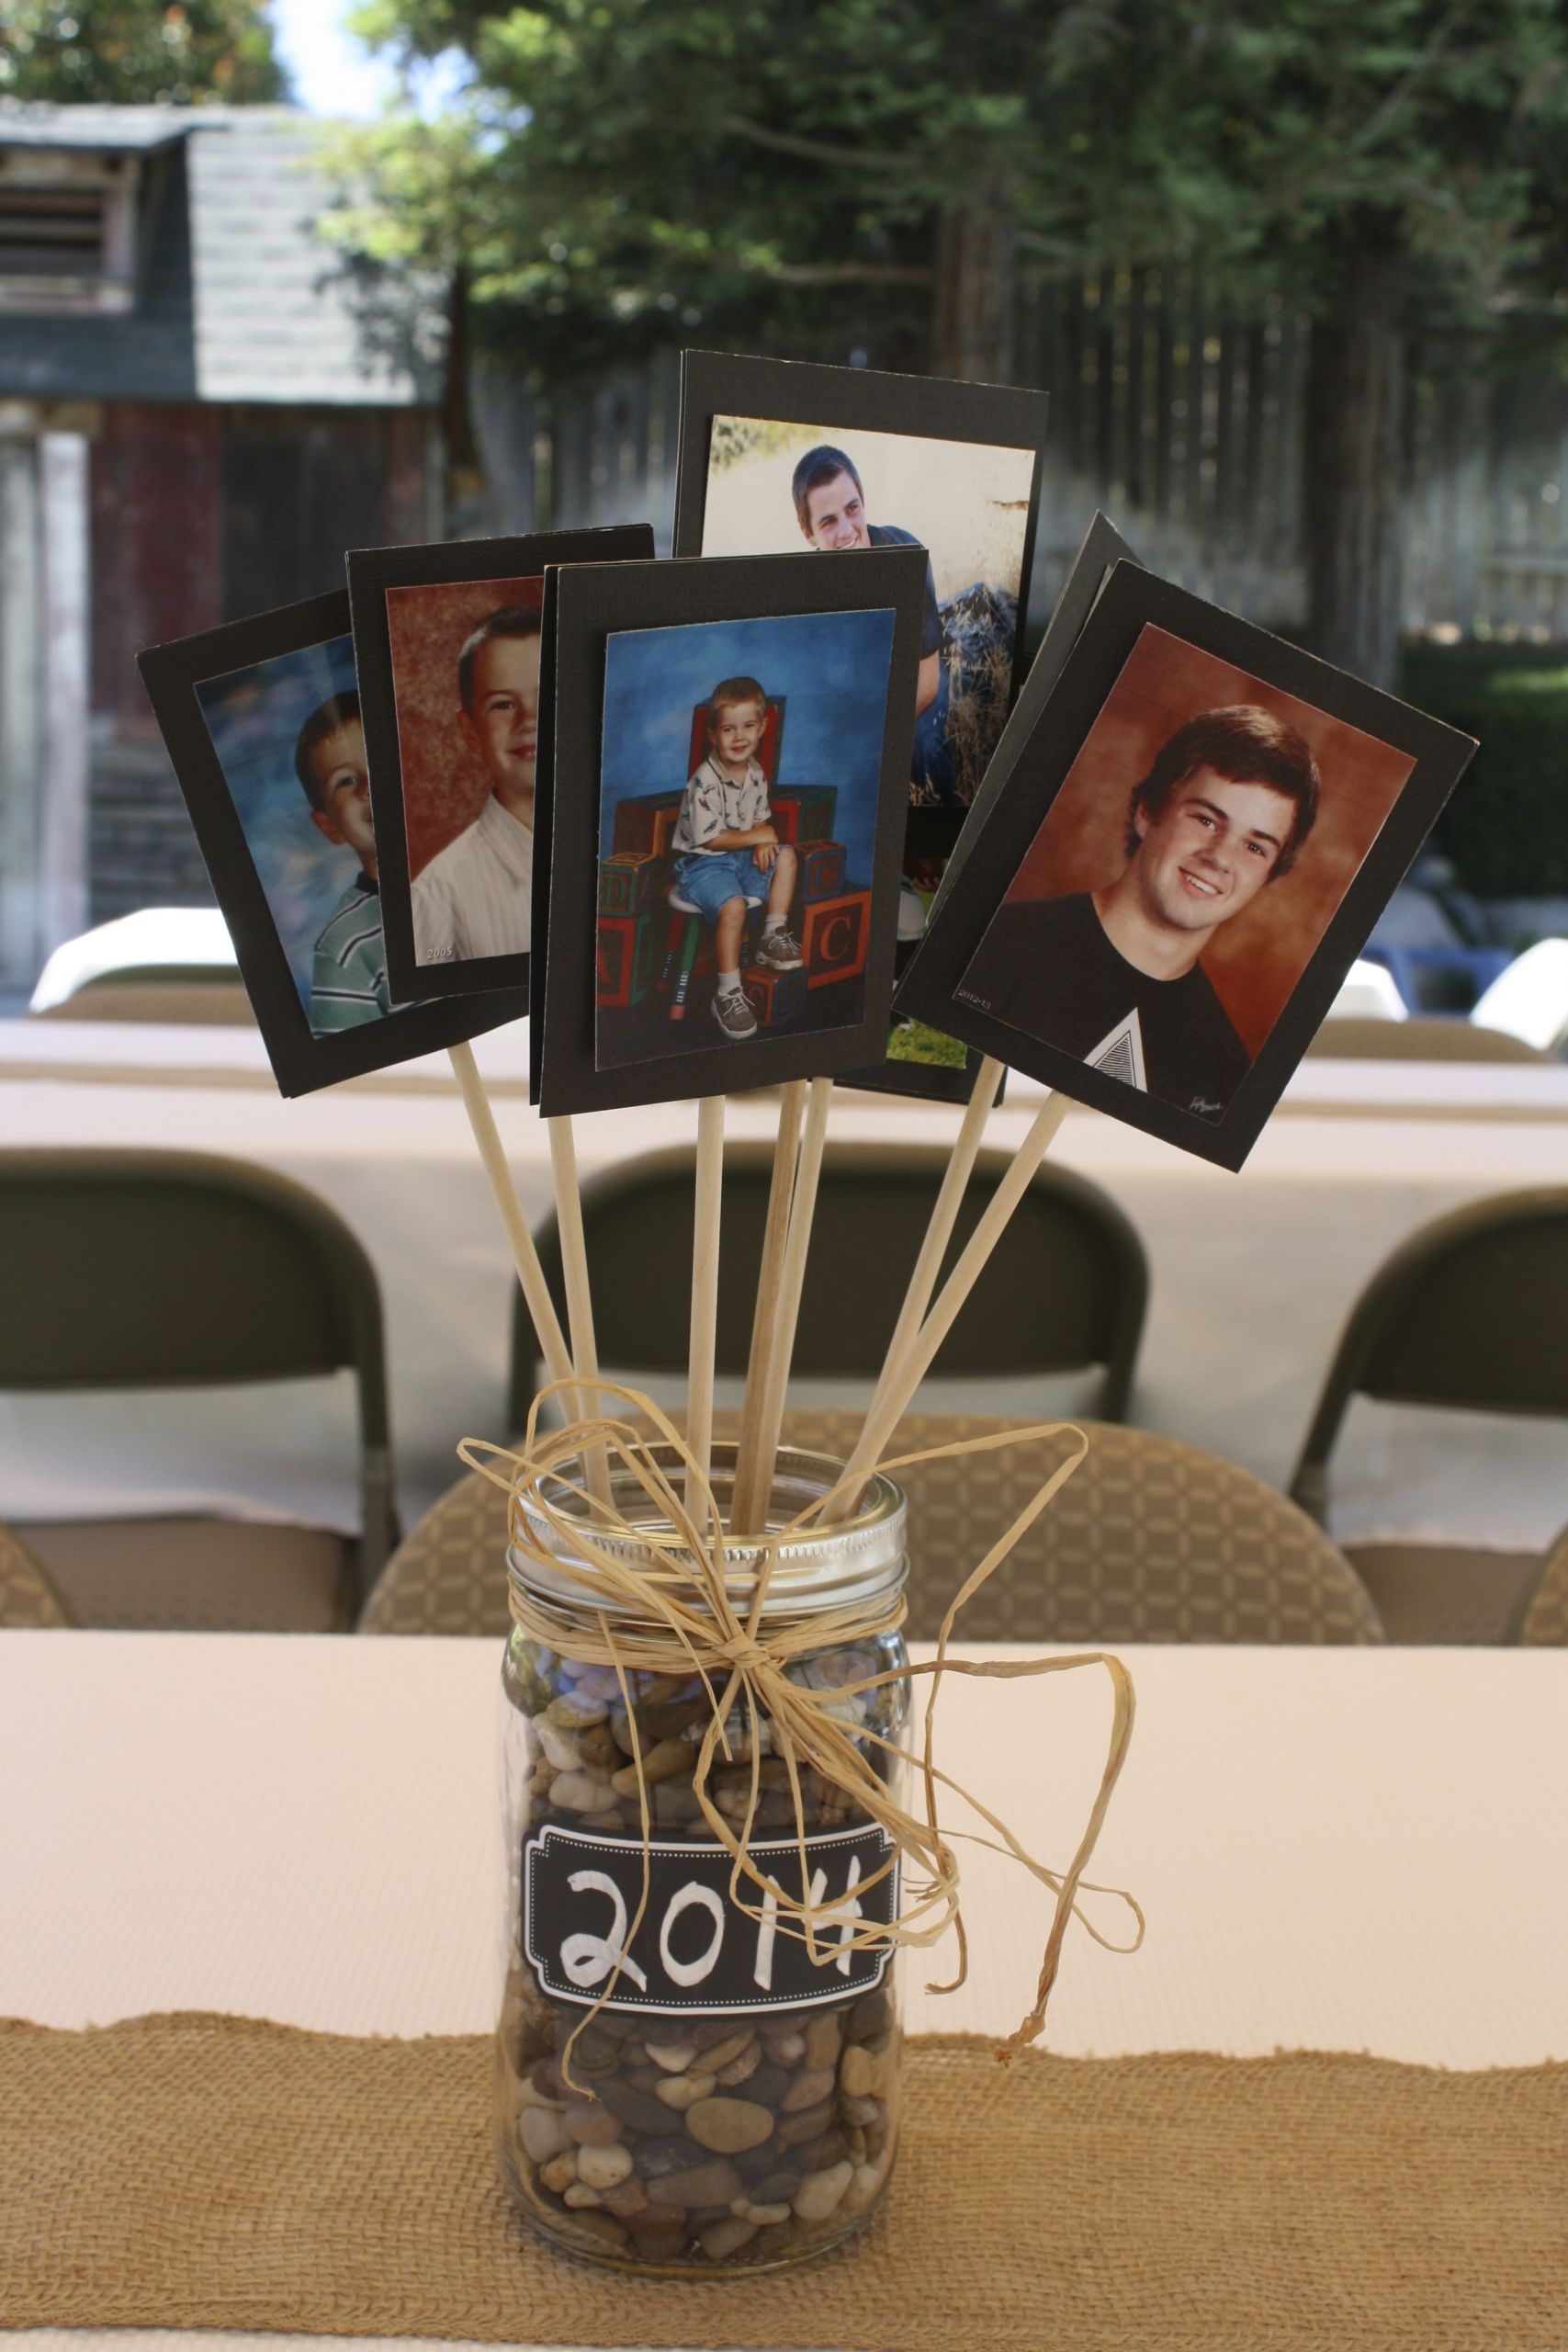 Ideas For Guys High School Graduation Party
 Centerpiece for tables at a graduation party Good for